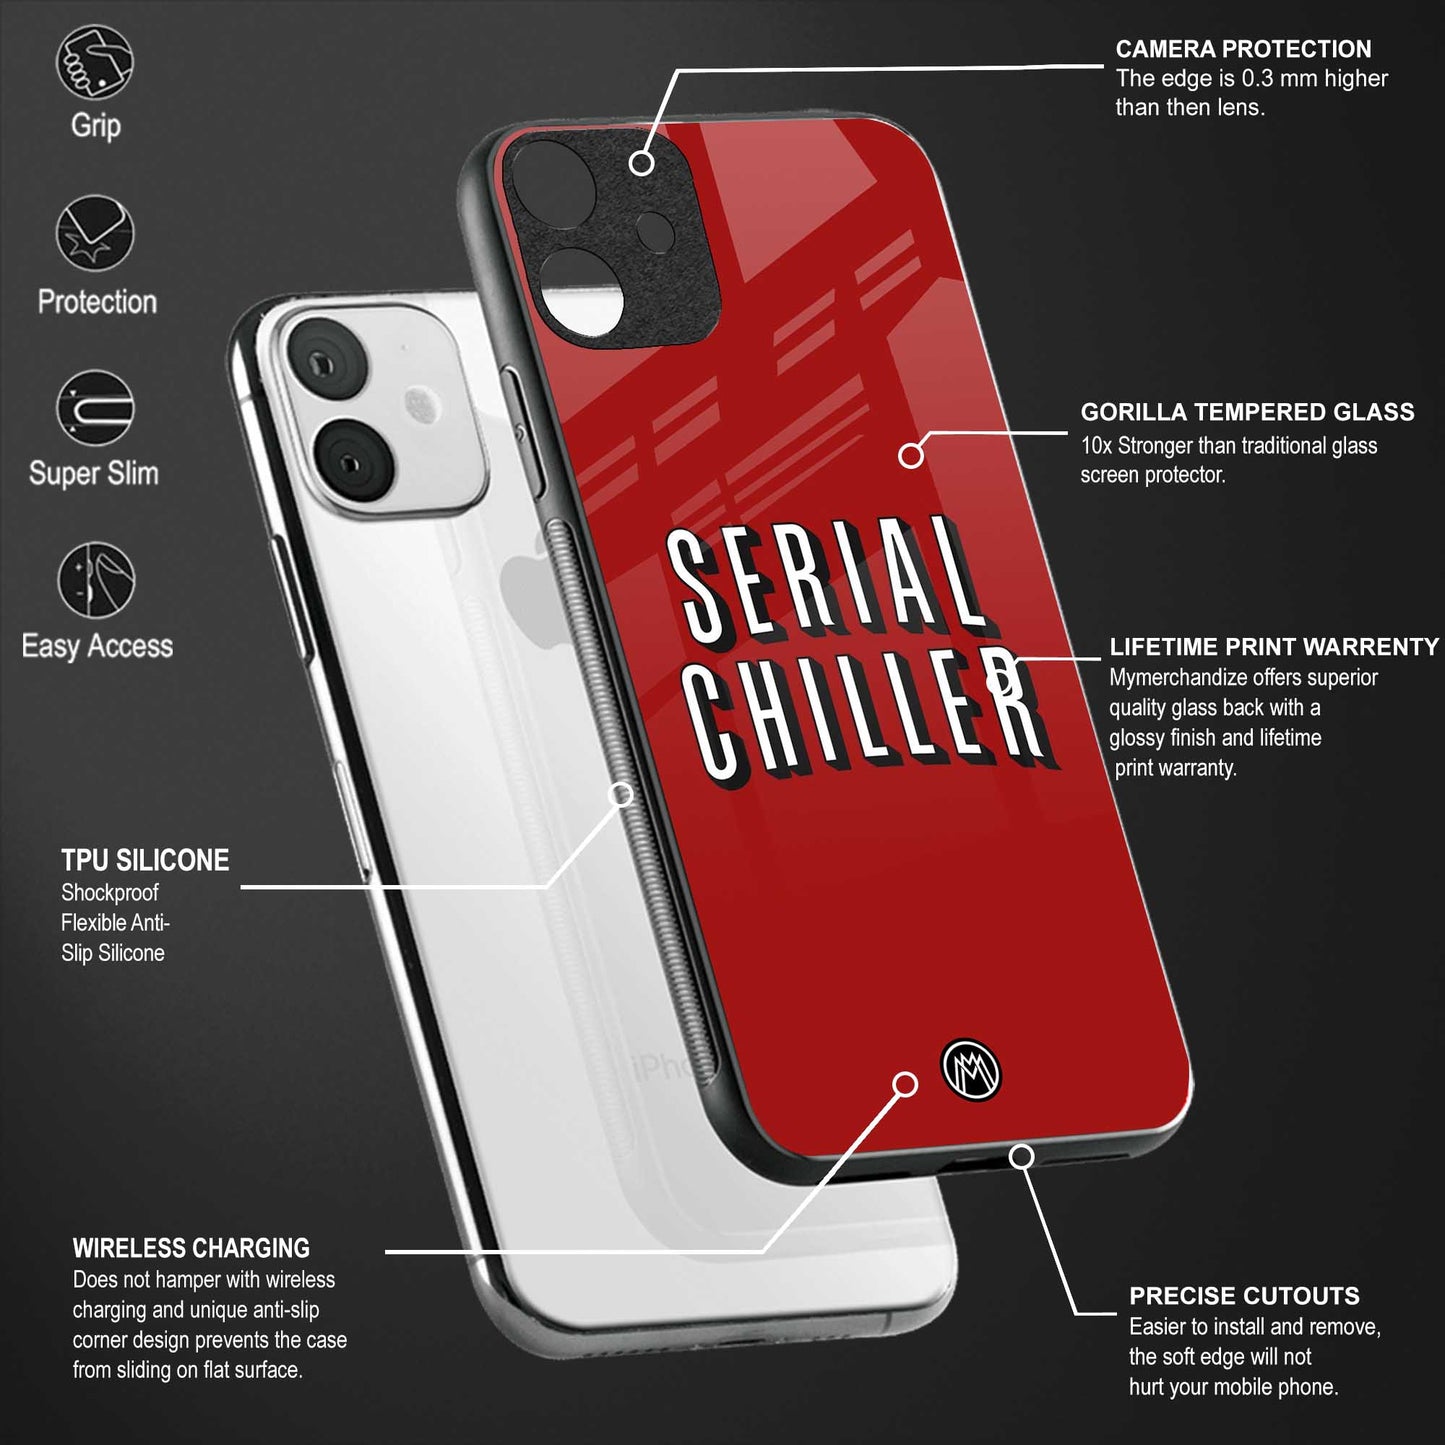 serial chiller netflix back phone cover | glass case for vivo y72